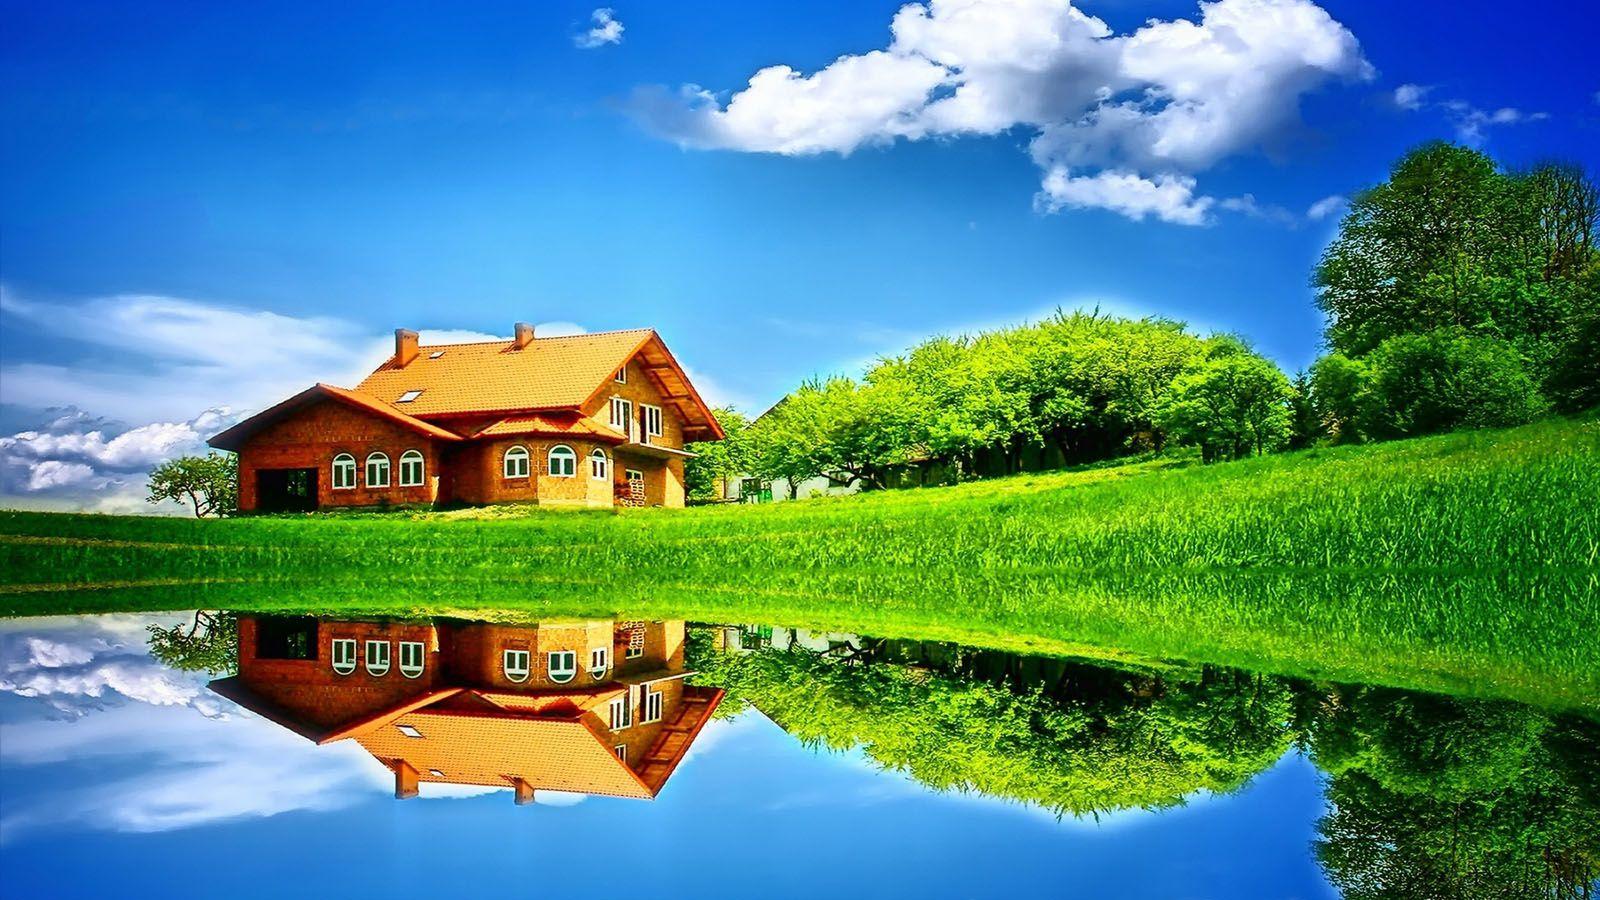 My sweet home, amazing!!. Sweet Home. Nature wallpaper